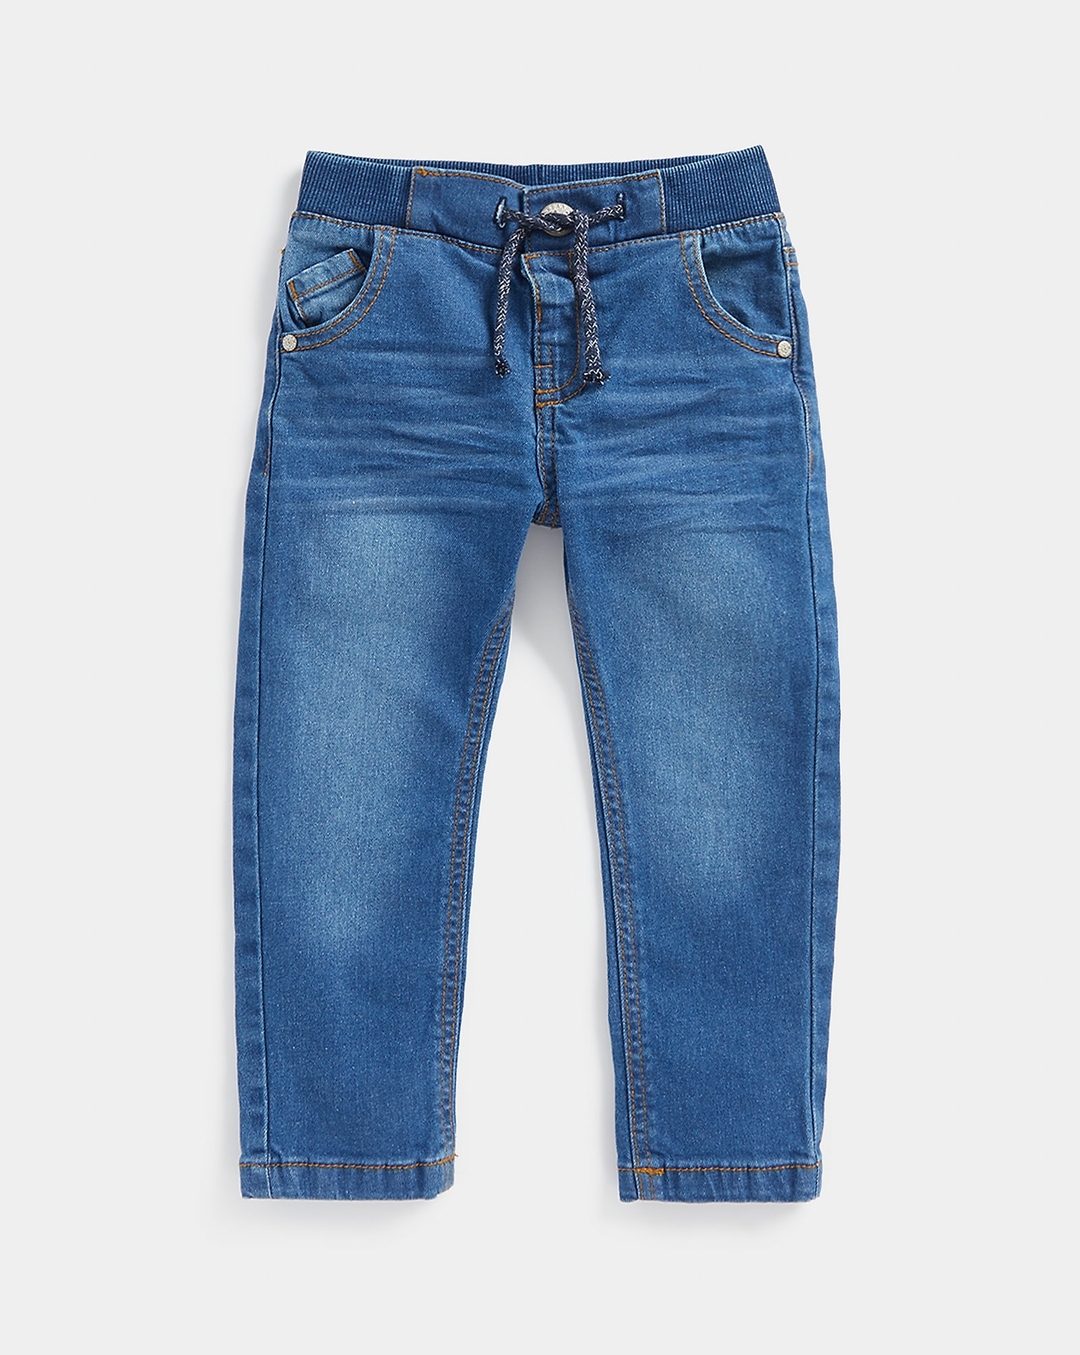 Buy Boys Jeans MidWash RibWaist Jeans -Denim Online at Best Price  Mothercare